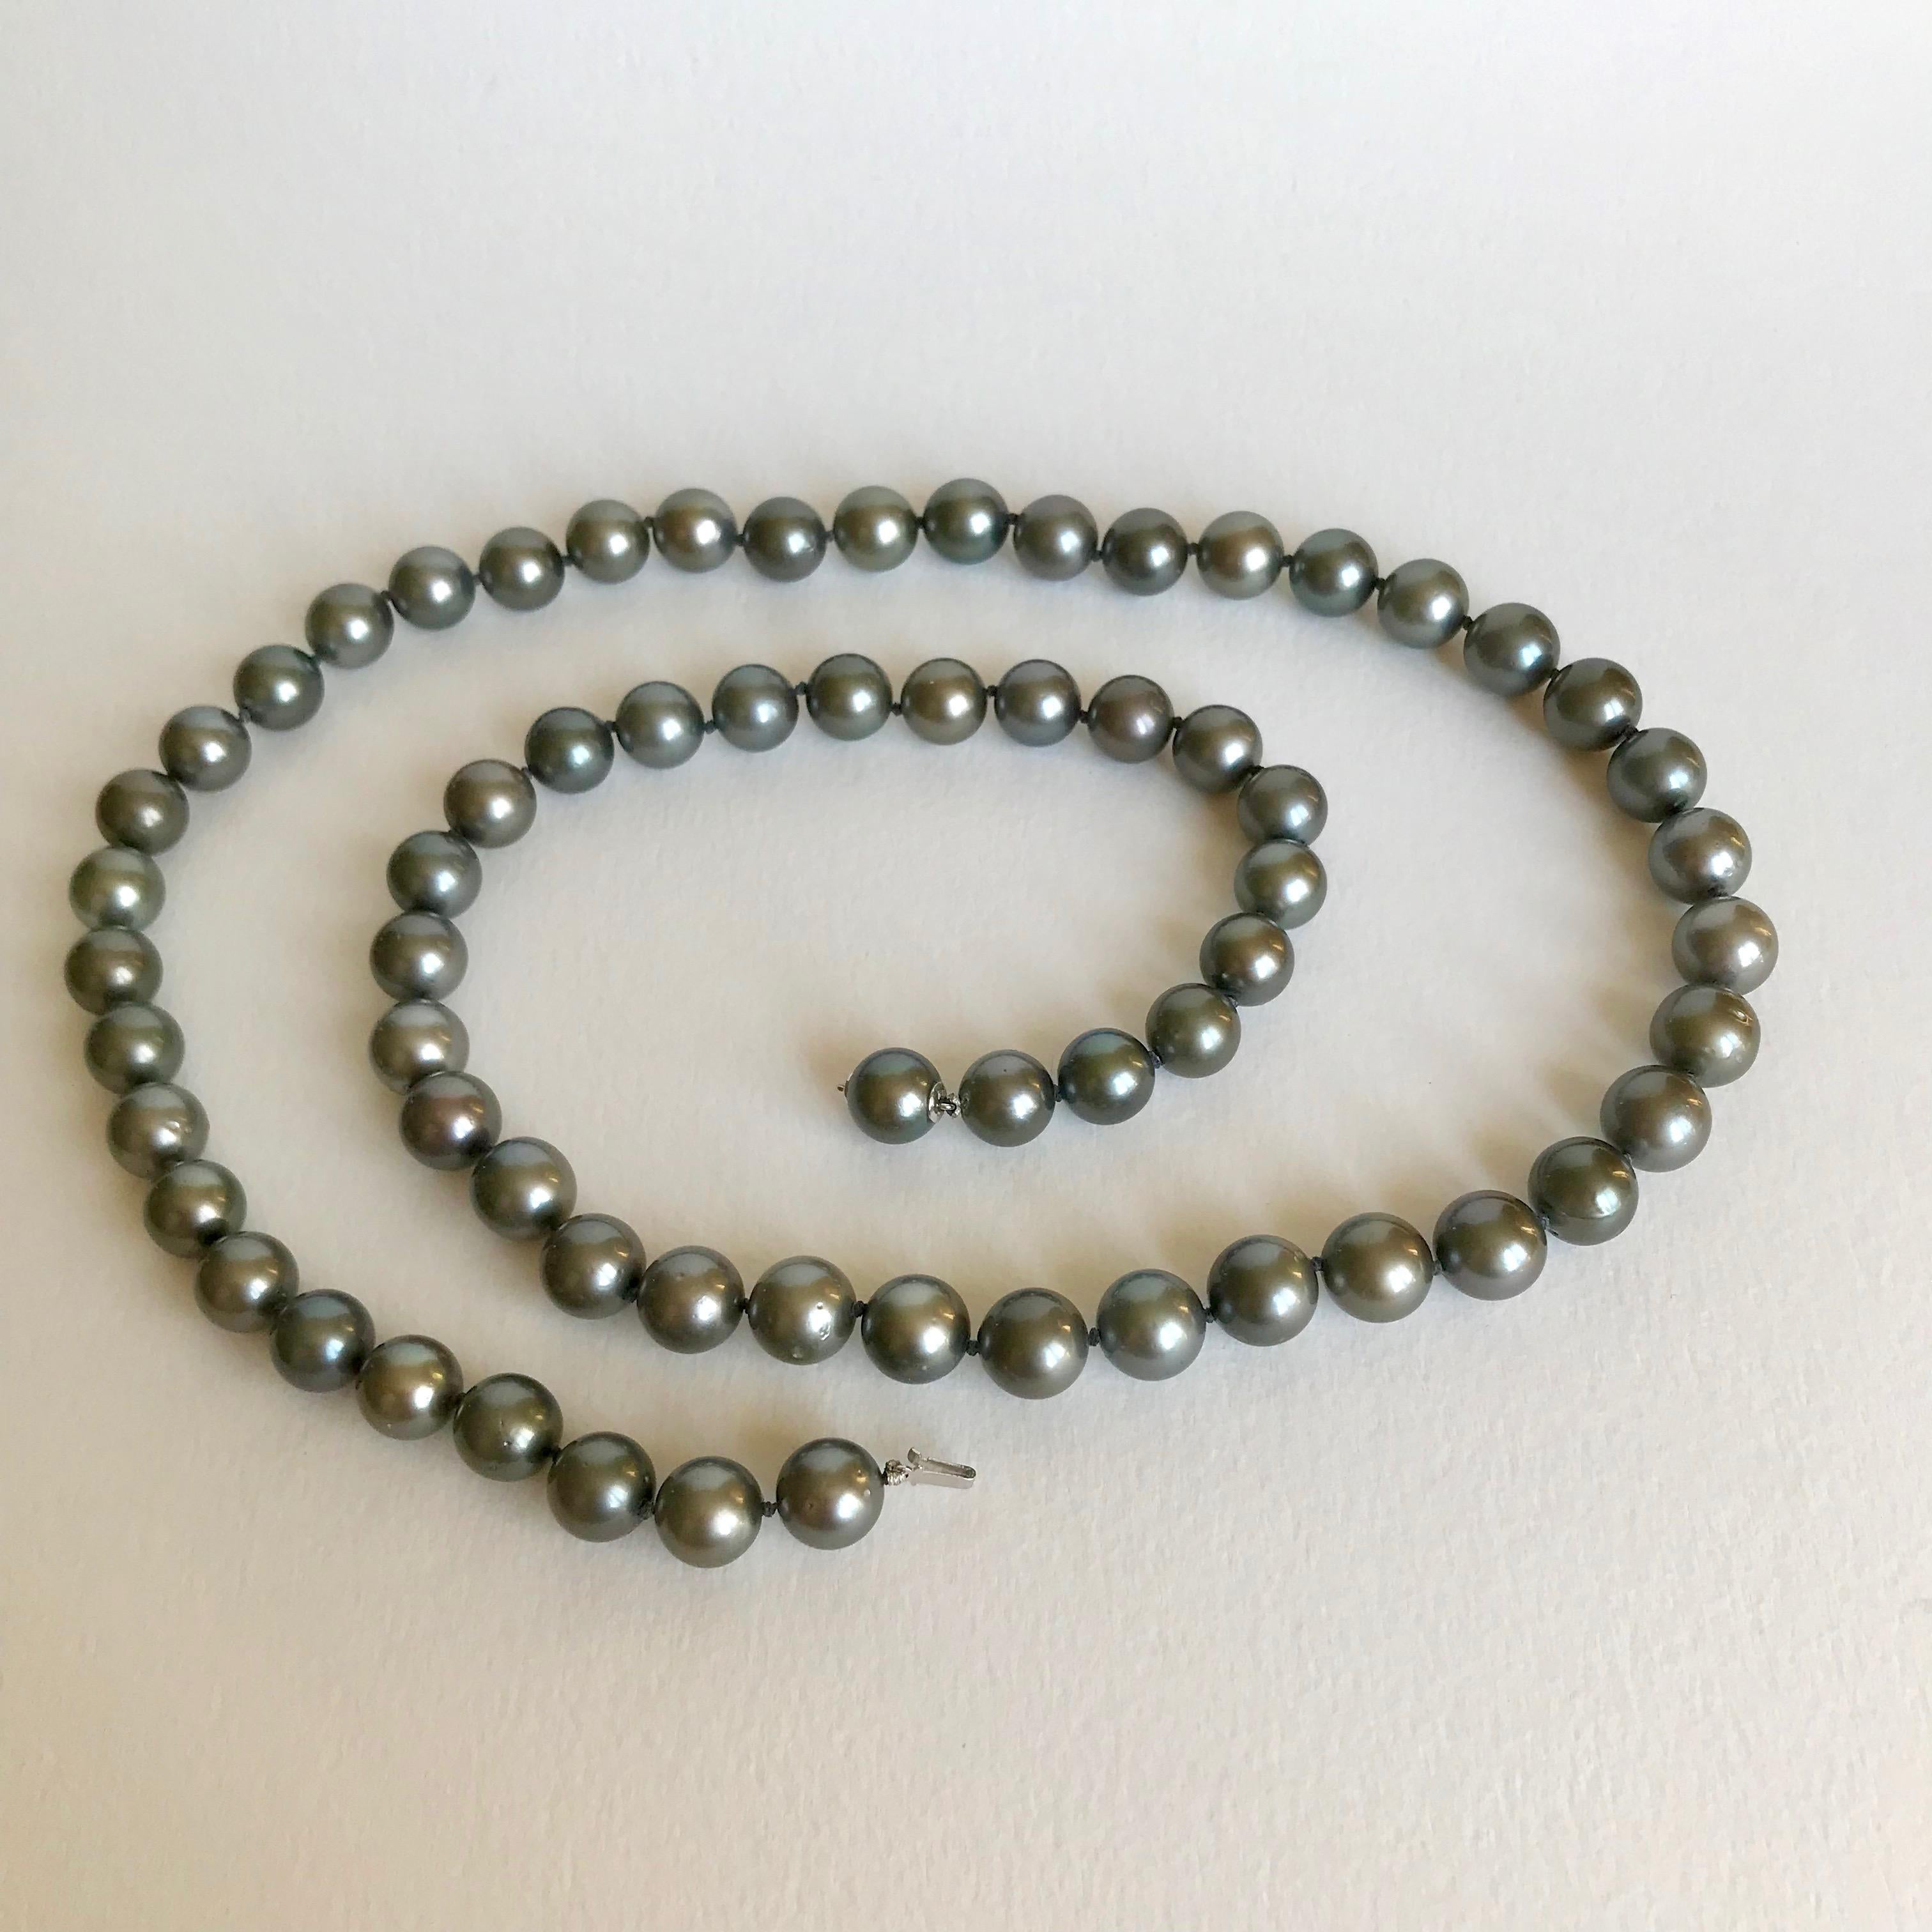 Very Long Necklace of Cultured Grey Pearls 12mm For Sale 7